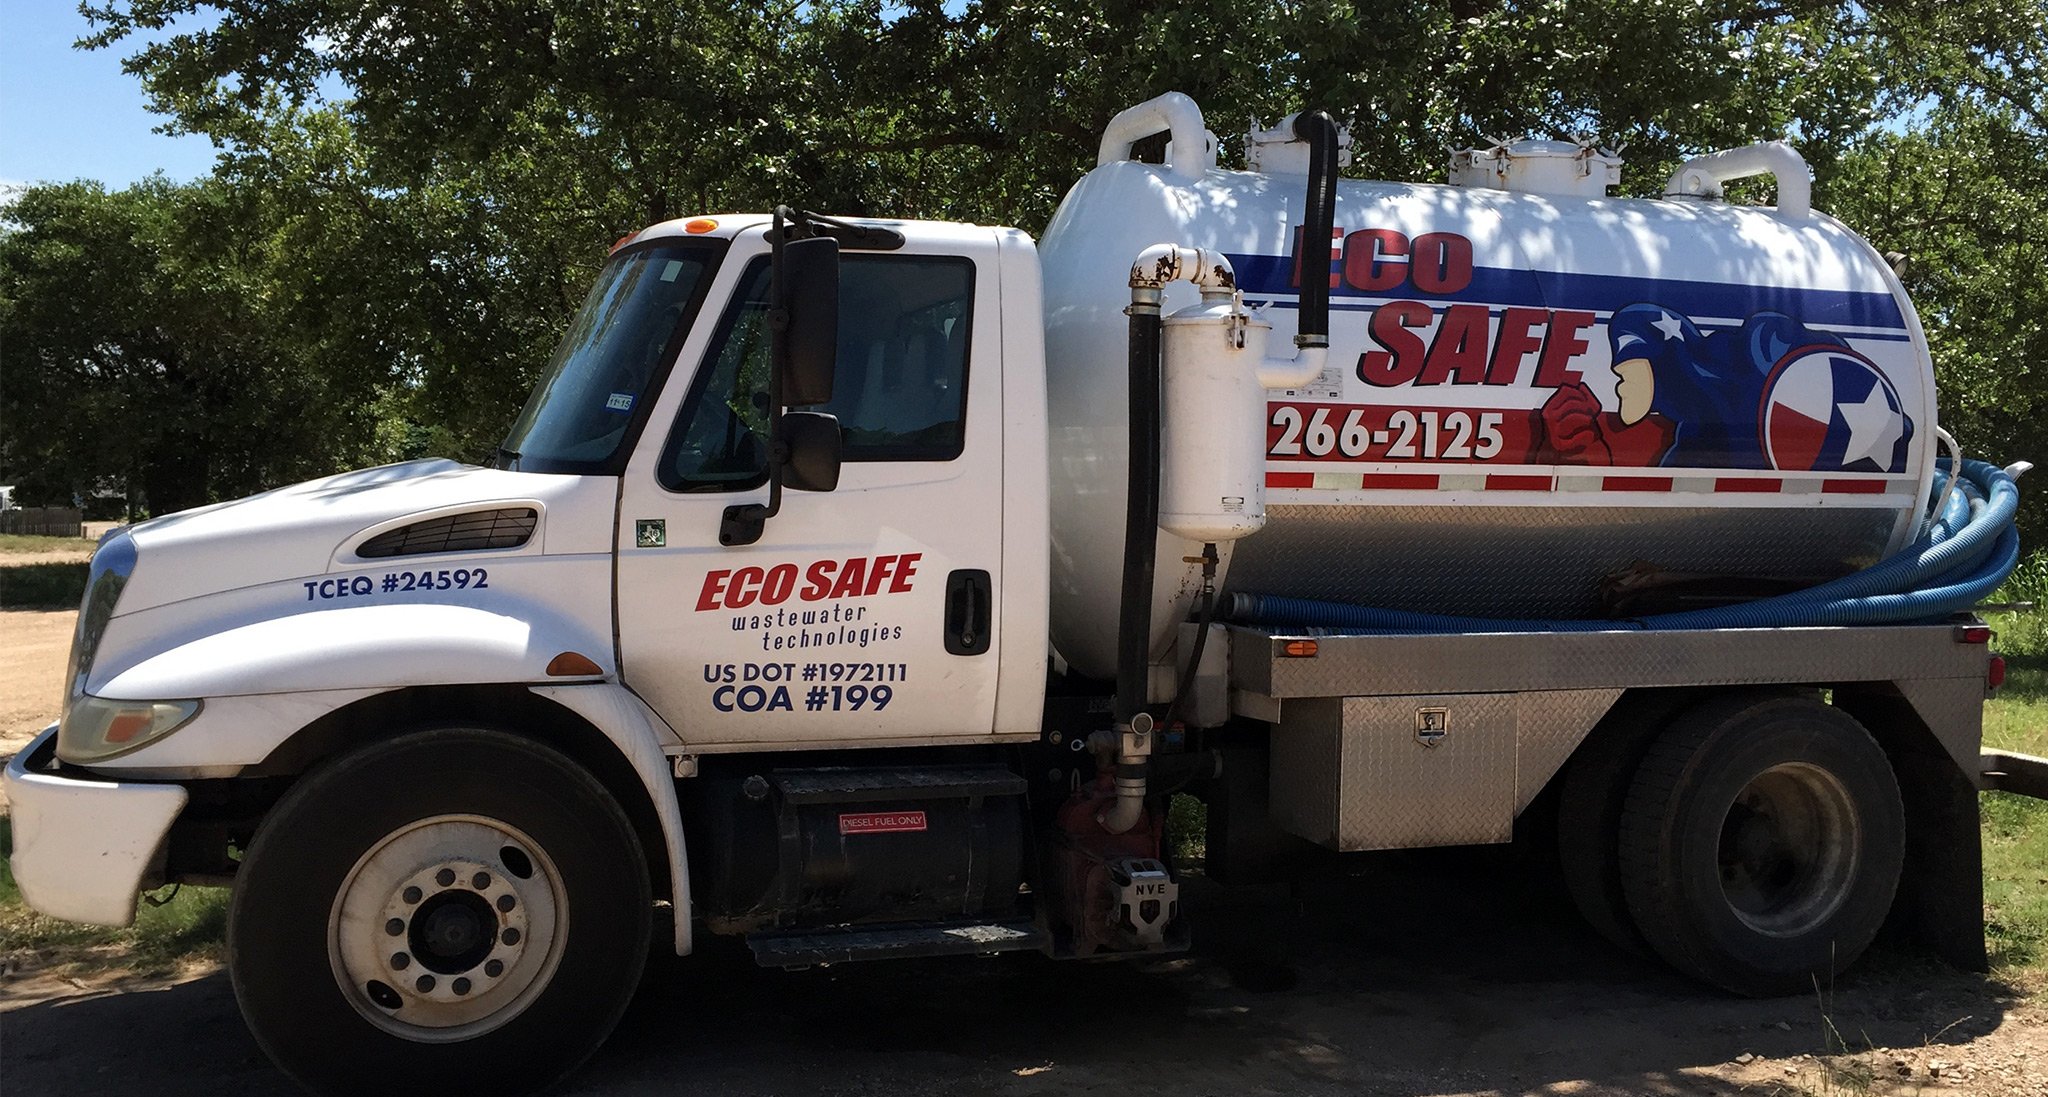 ECO SAFE Wastewater - Lake Travis Septic Systems